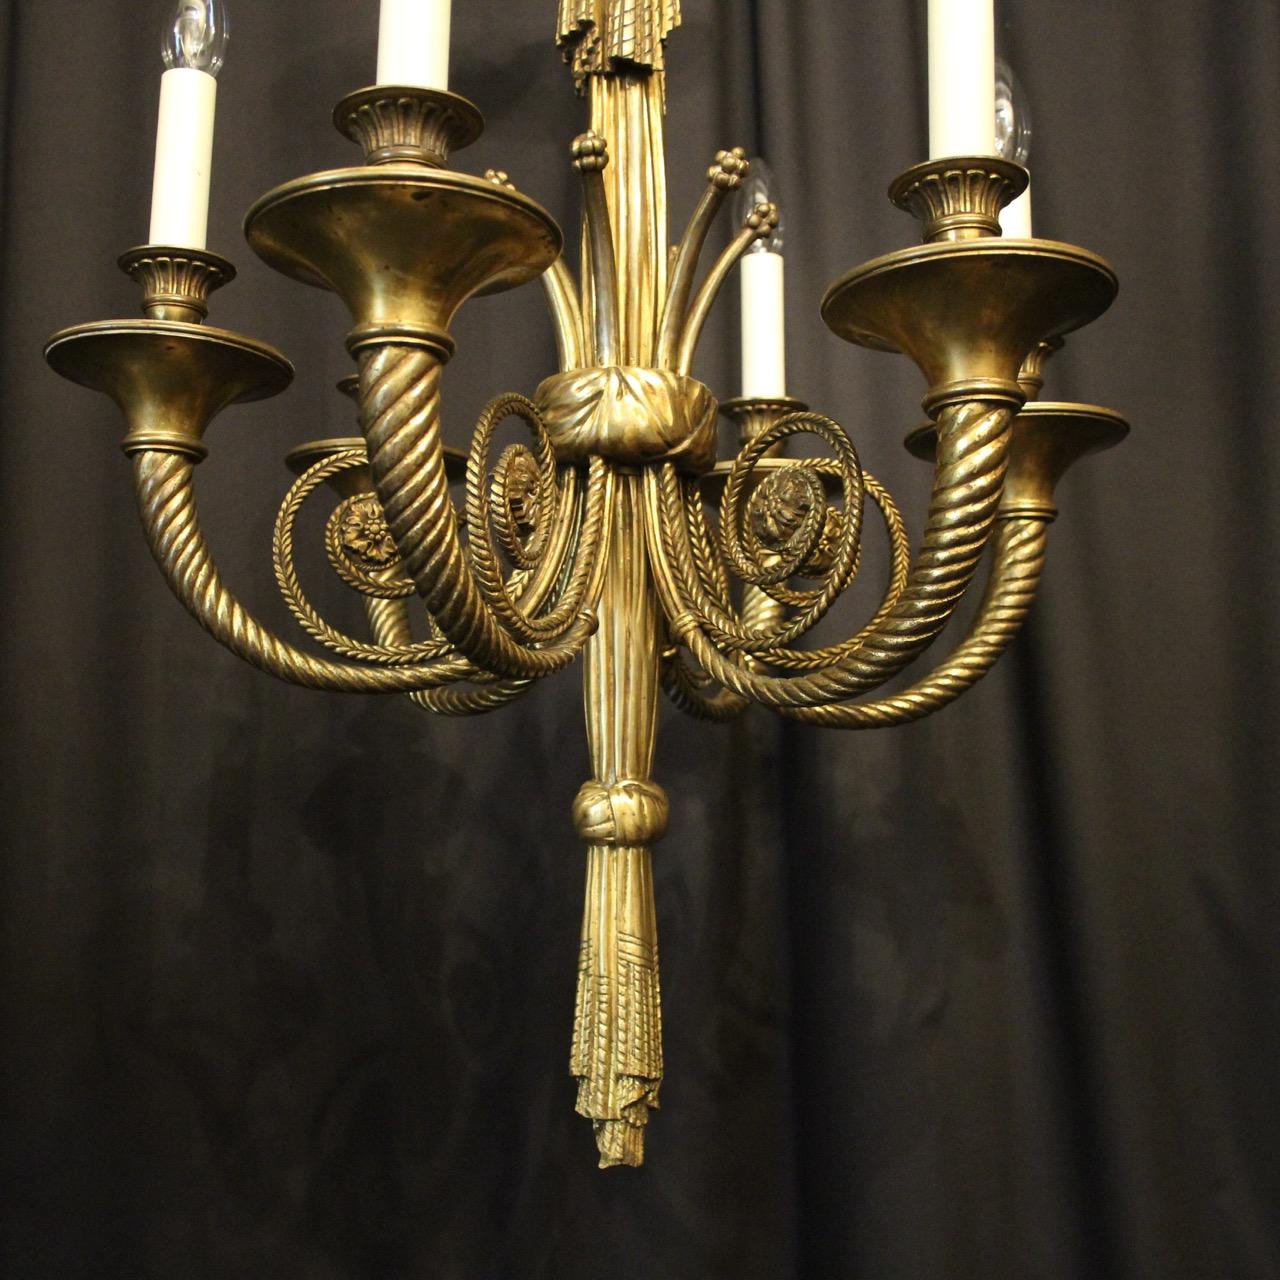 French 19th Century Gilded Bronze 6-Light Antique Chandelier For Sale 1